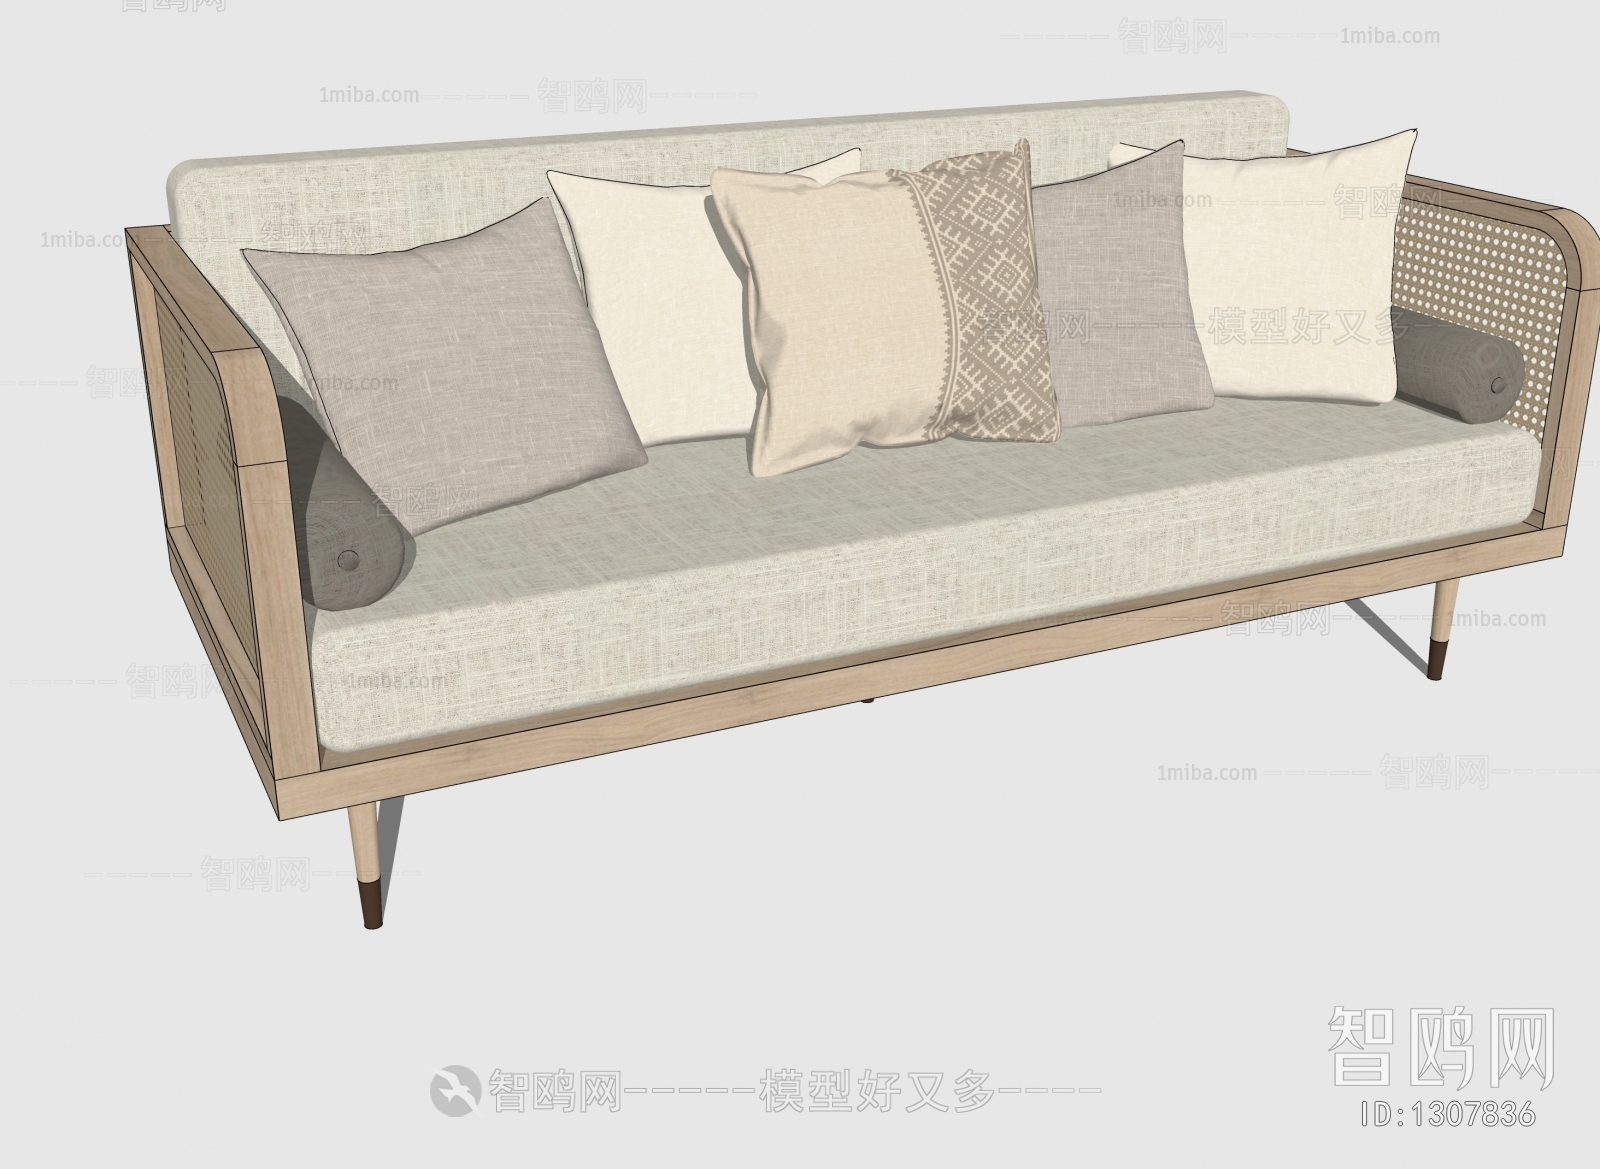 Japanese Style A Sofa For Two